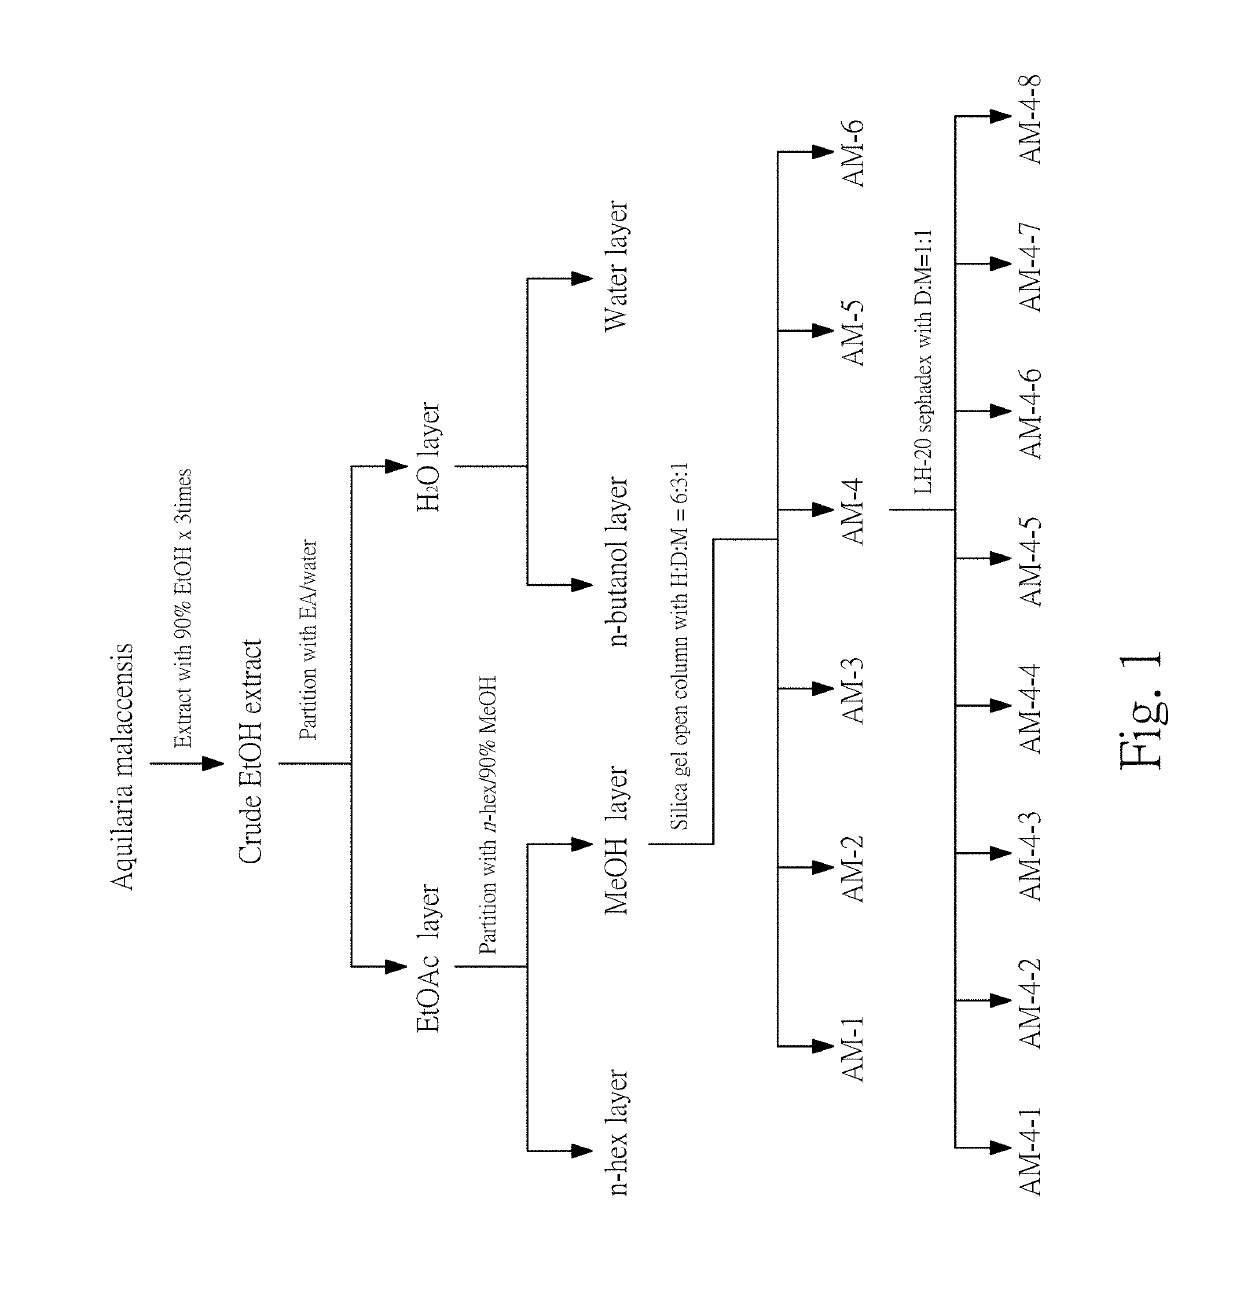 Compositions and methods of antiallergic phorbol ester and phorbol derivatives as the main active ingredients from the seeds of aquilaria malaccensis